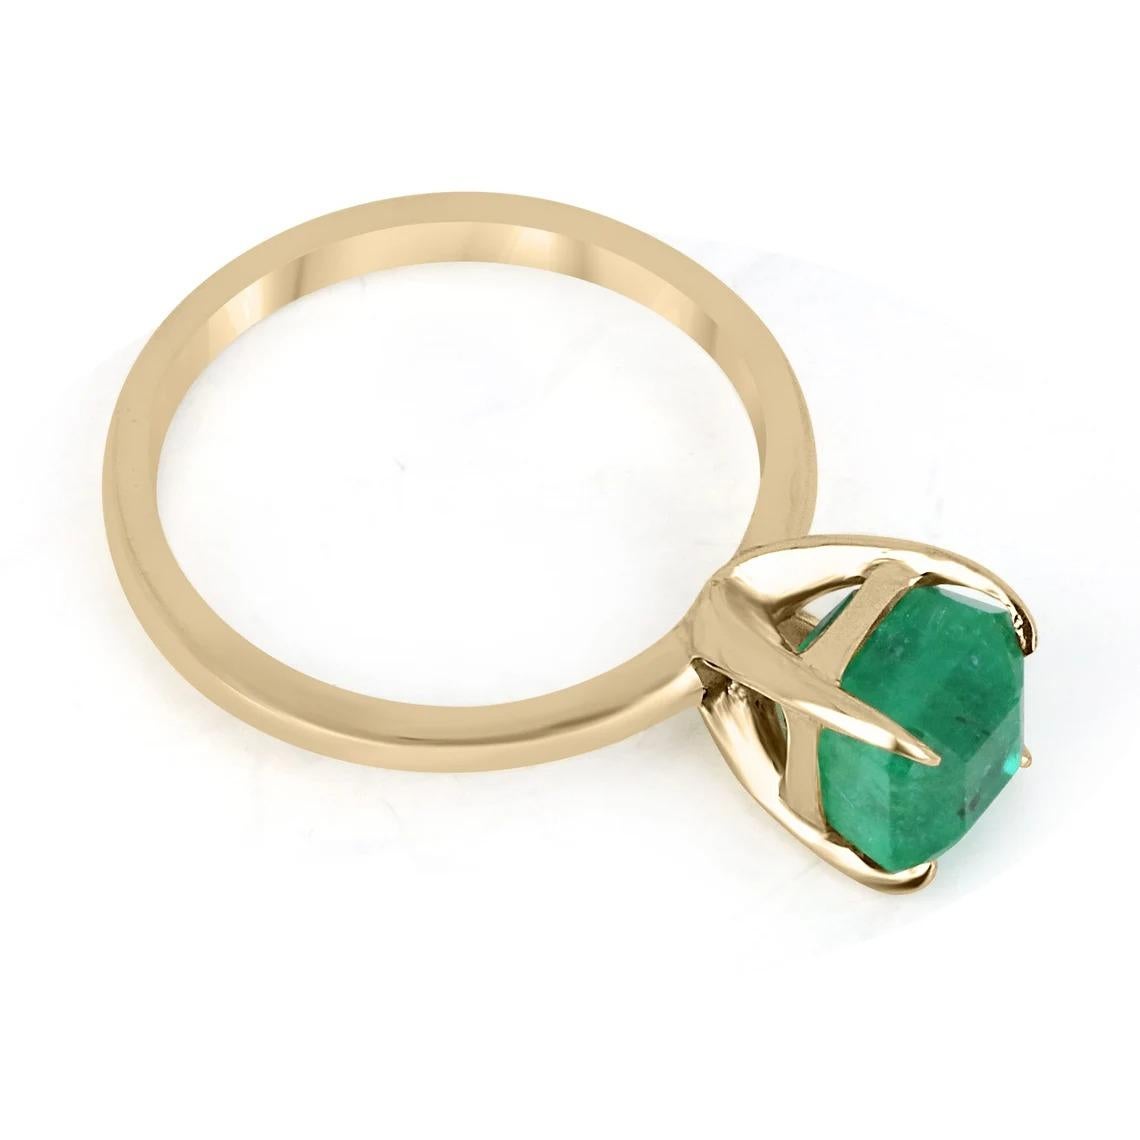 Displayed is a classic emerald solitaire Asscher-cut engagement ring/right-hand ring in 14K yellow gold. This gorgeous solitaire ring carries a full 2.65-carat emerald in a four-prong setting. Fully faceted, this gemstone showcases excellent shine.